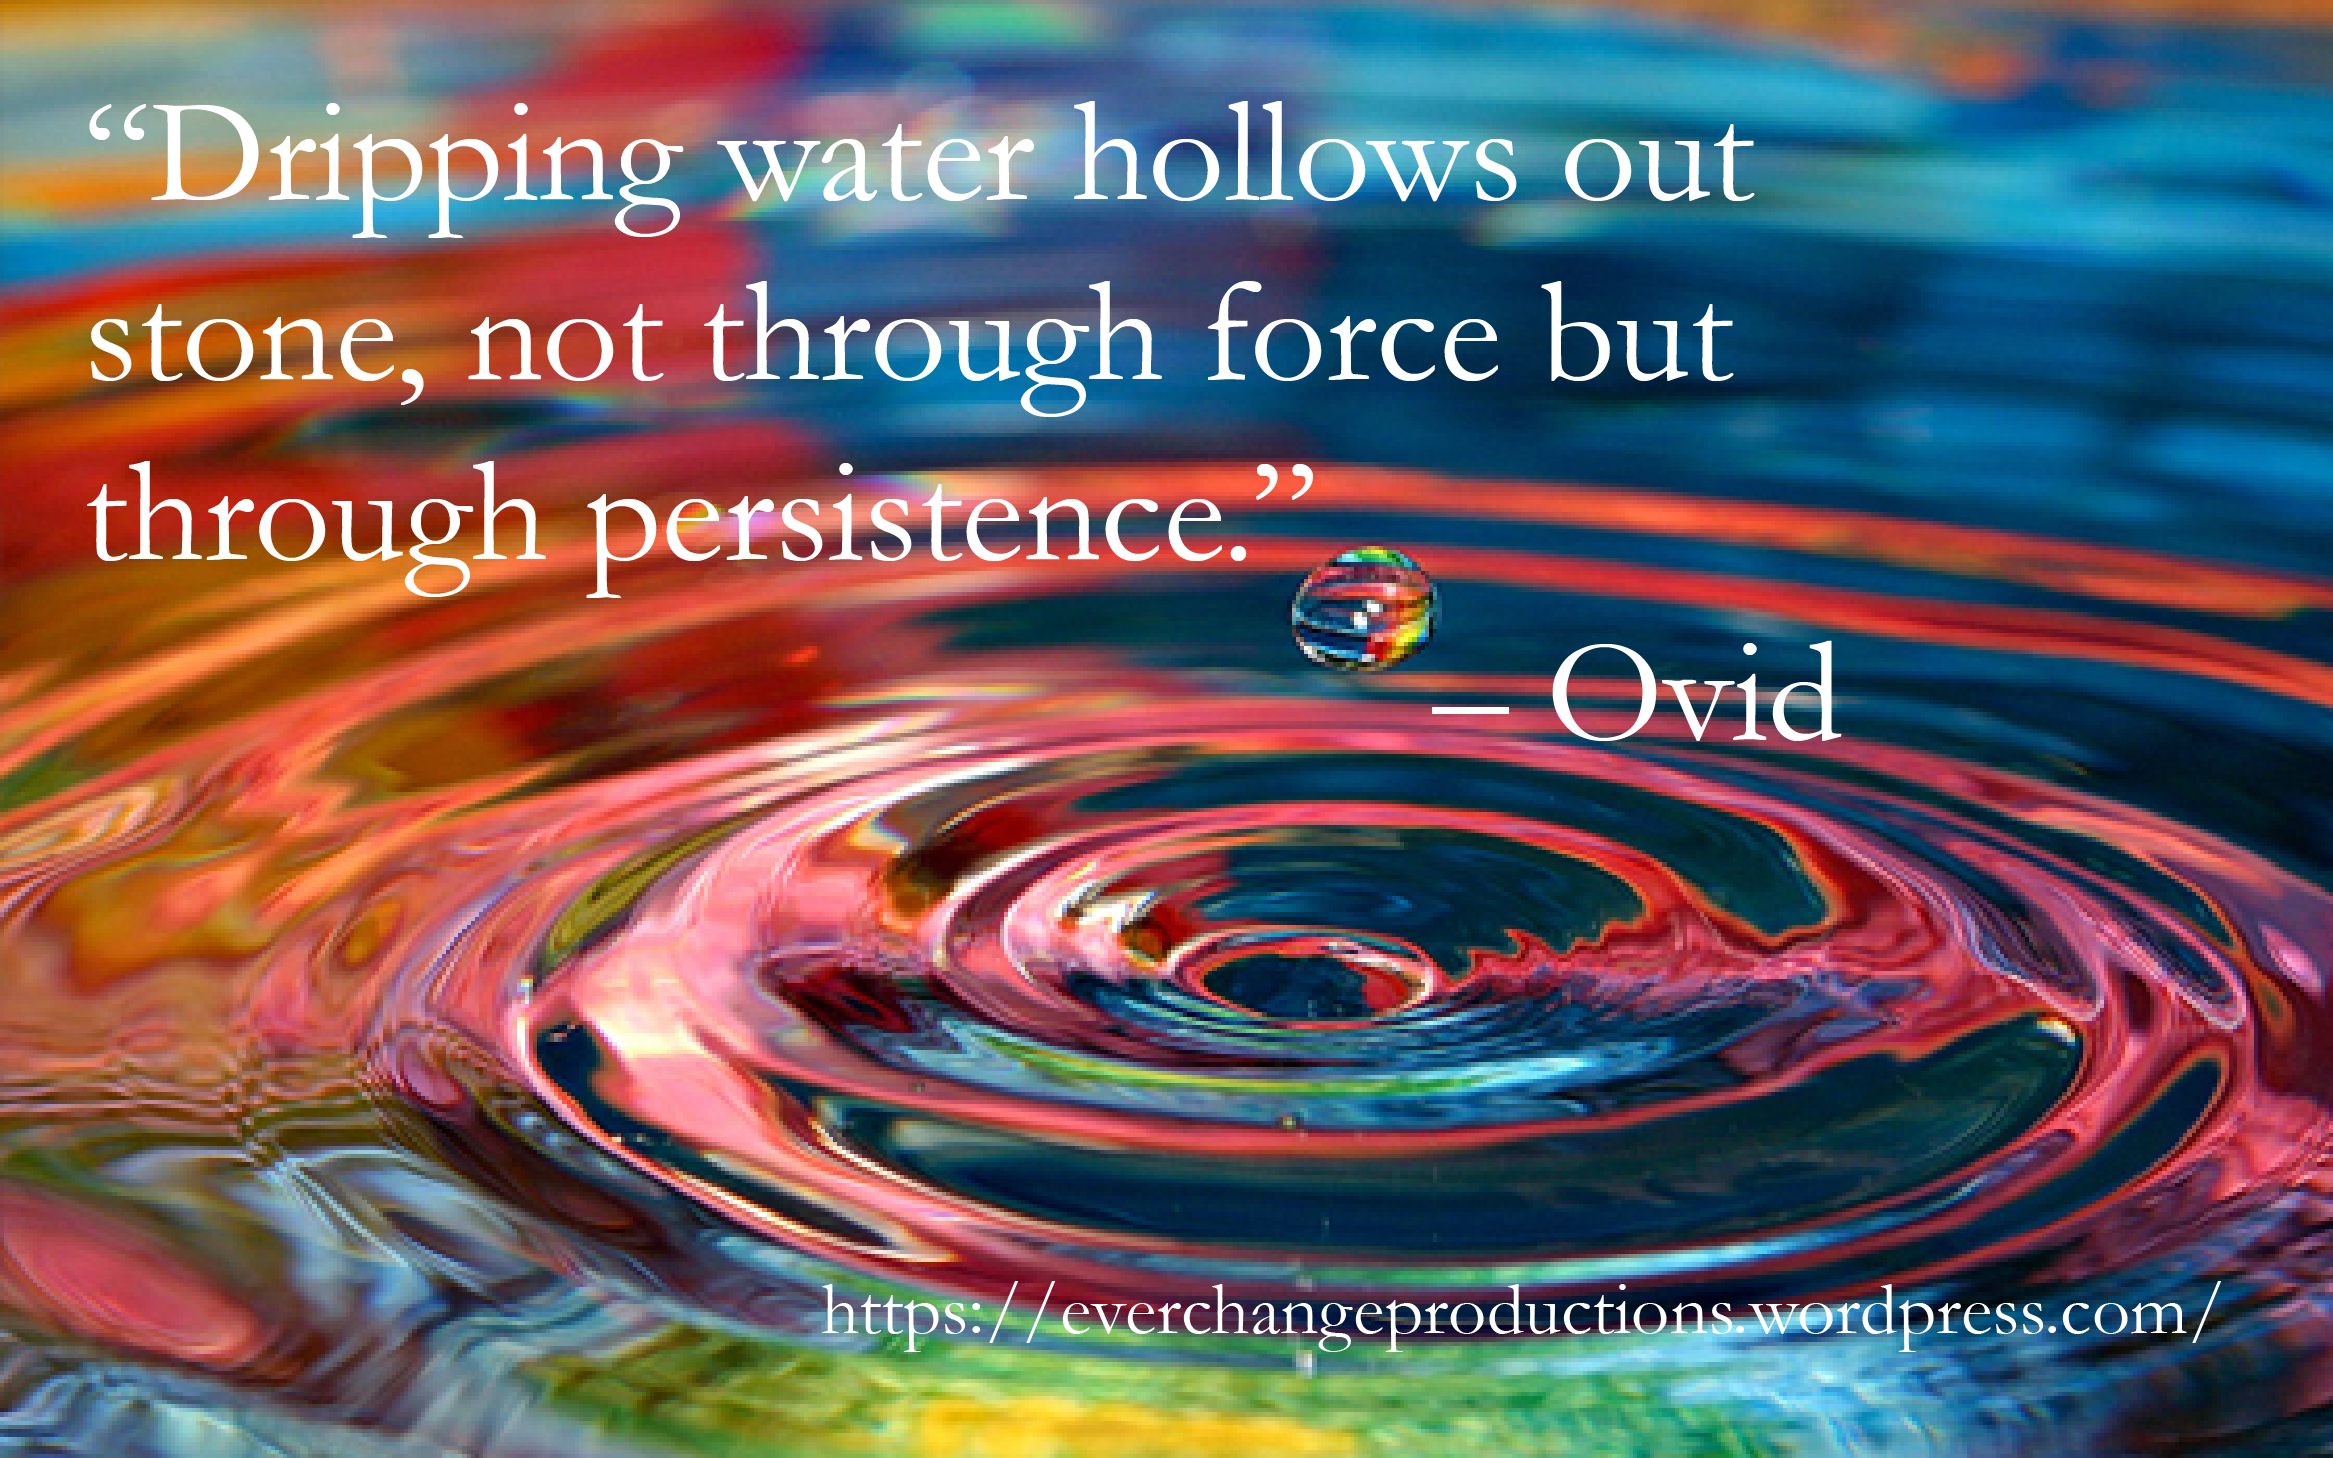 “Dripping water hollows out stone, not through force but through persistence.” – Ovid motivational quote